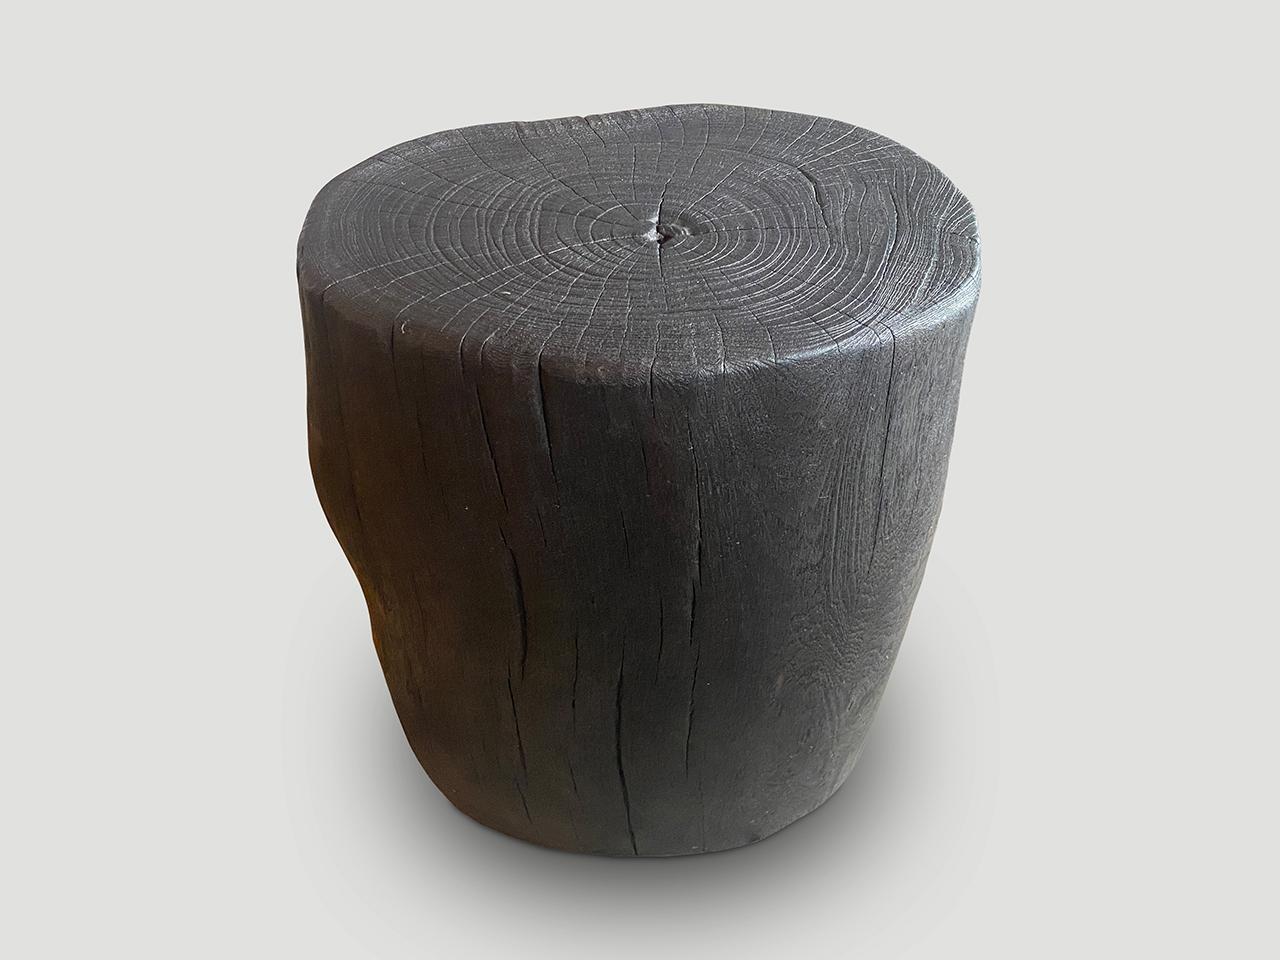 Minimalist hand carved reclaimed suar wood side table. Charred sanded and sealed whilst respecting the natural organic shape. Finished with a natural oil revealing the beautiful wood grain.

The Triple Burnt Collection represents a unique line of